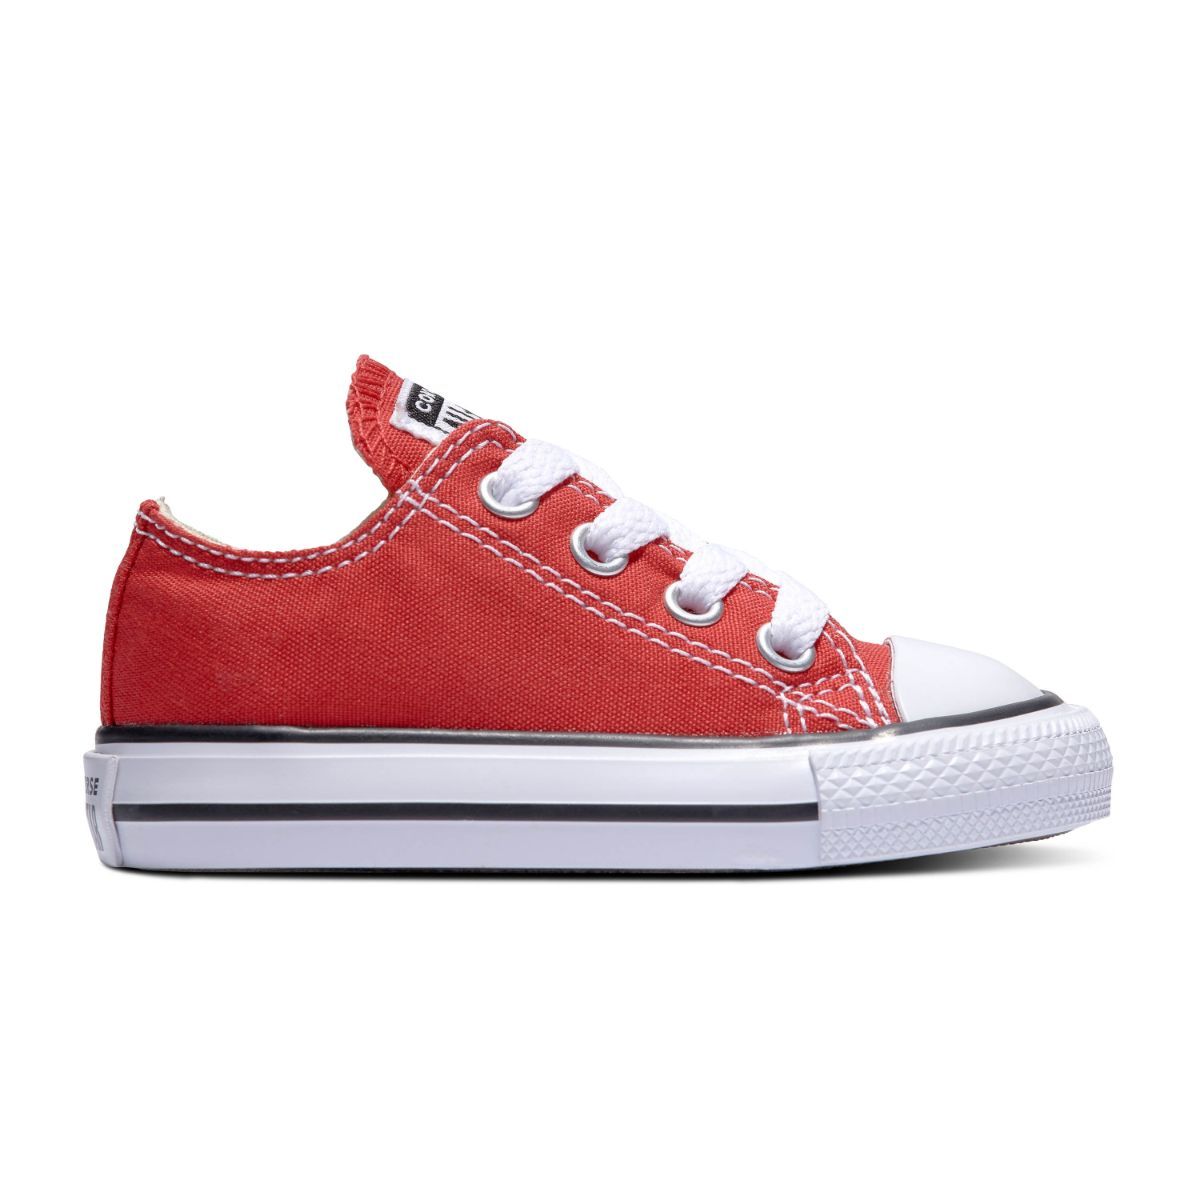 Toddler Chuck Taylor All Star Red Low Top